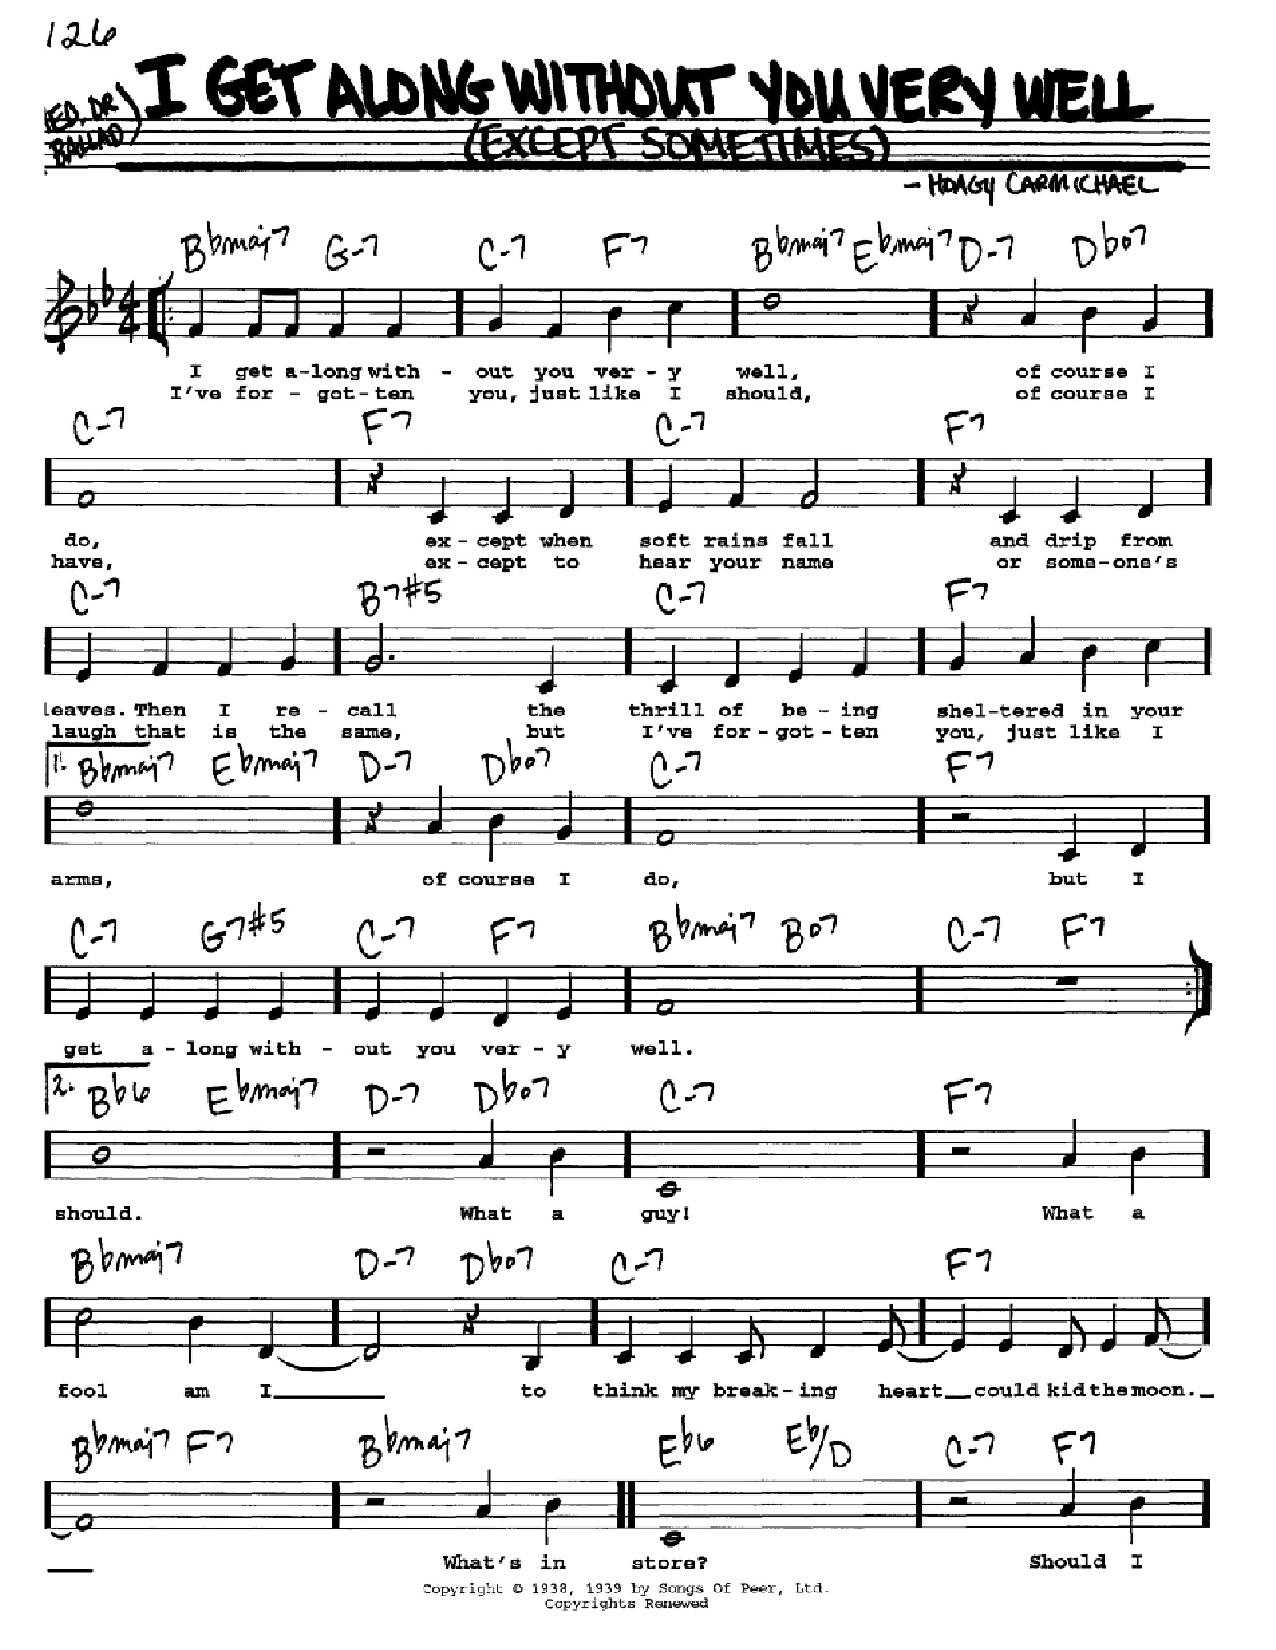 Download Hoagy Carmichael I Get Along Without You Very Well (Exce Sheet Music